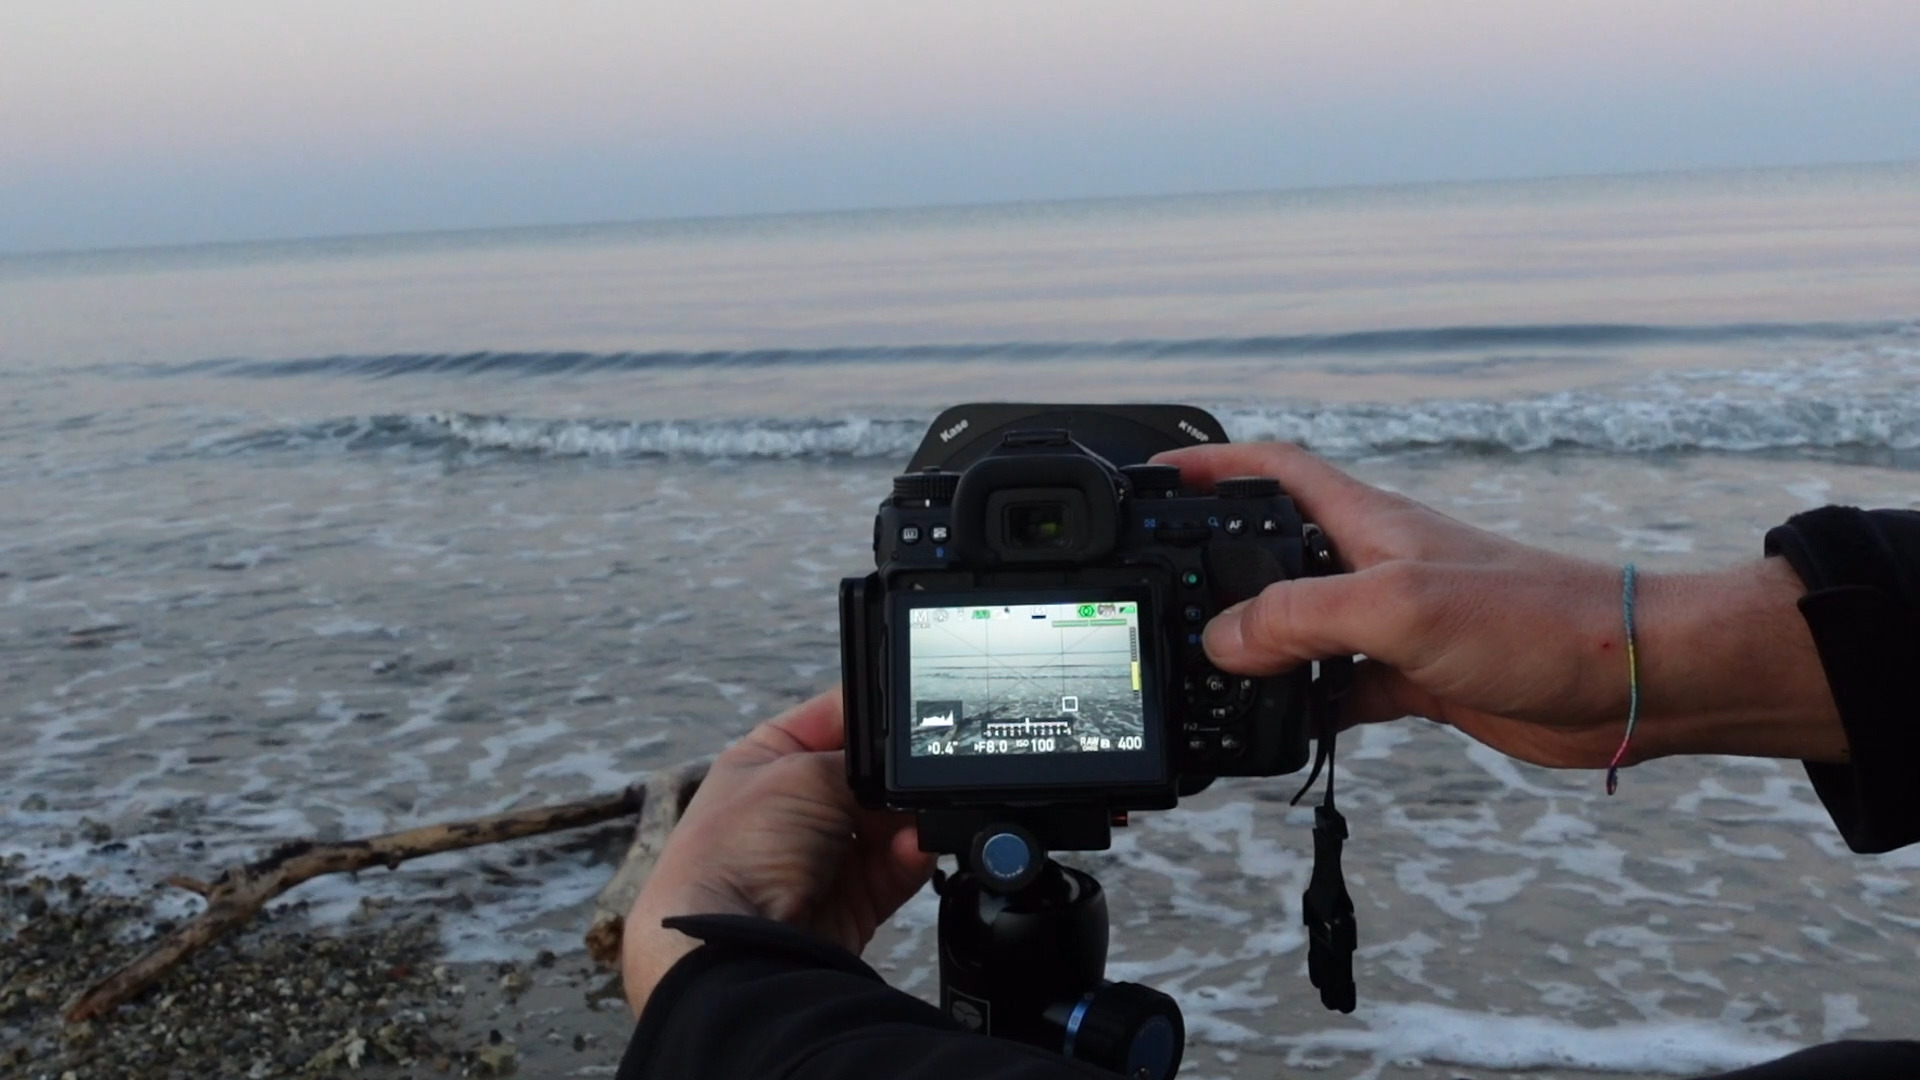 IV. Choosing the Right Wide-Angle Lens for Seascapes